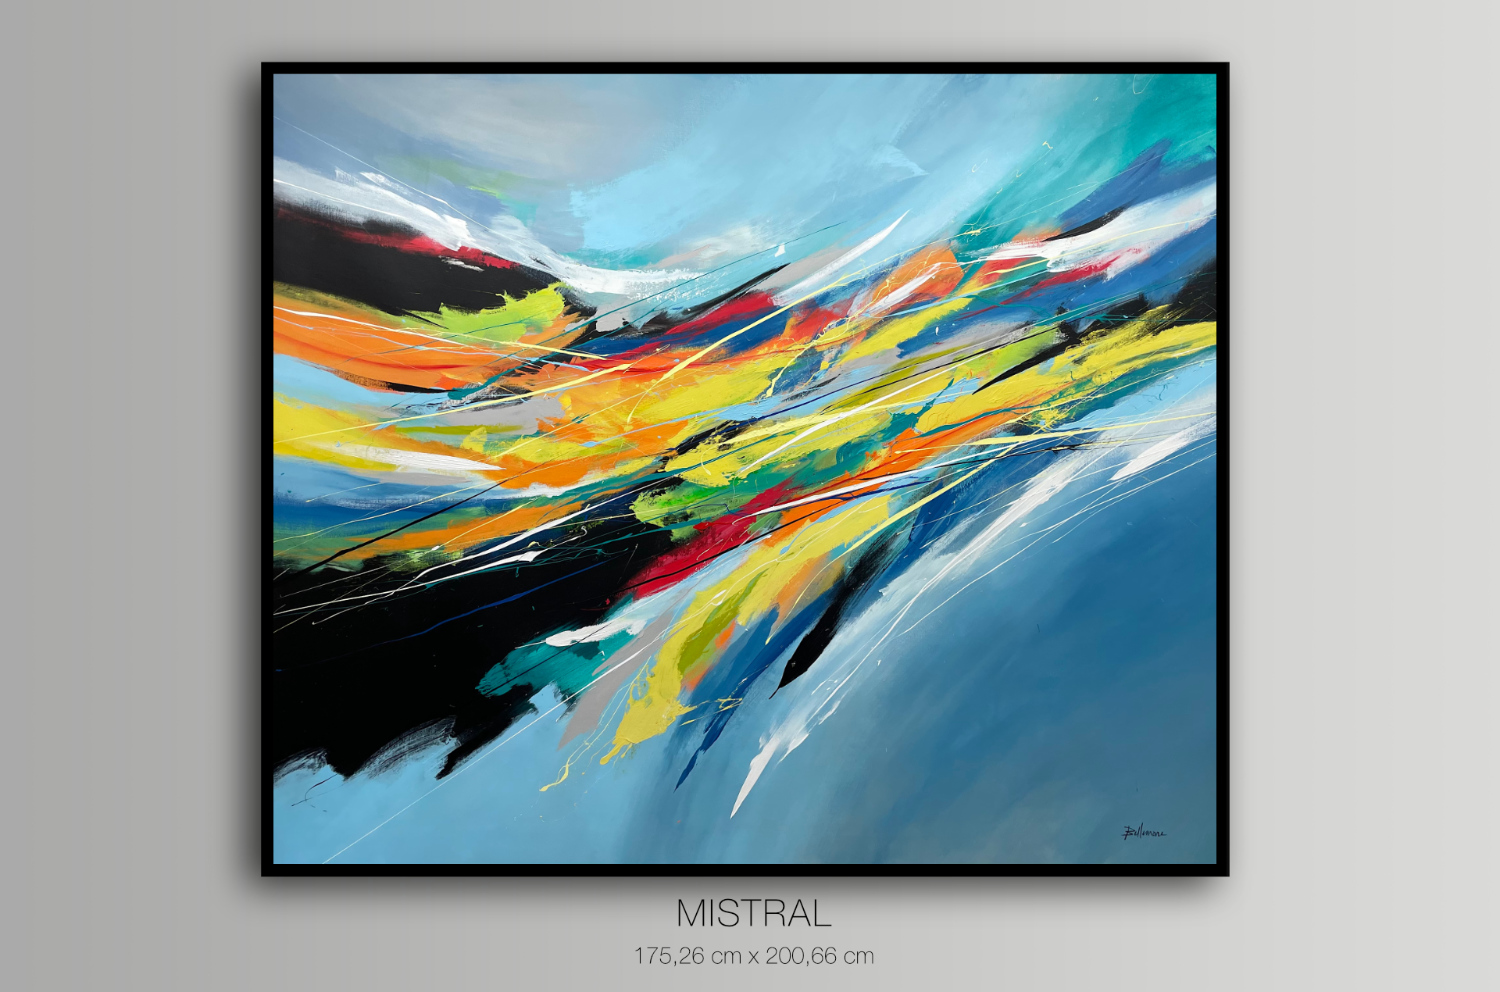 Mistral - Featured